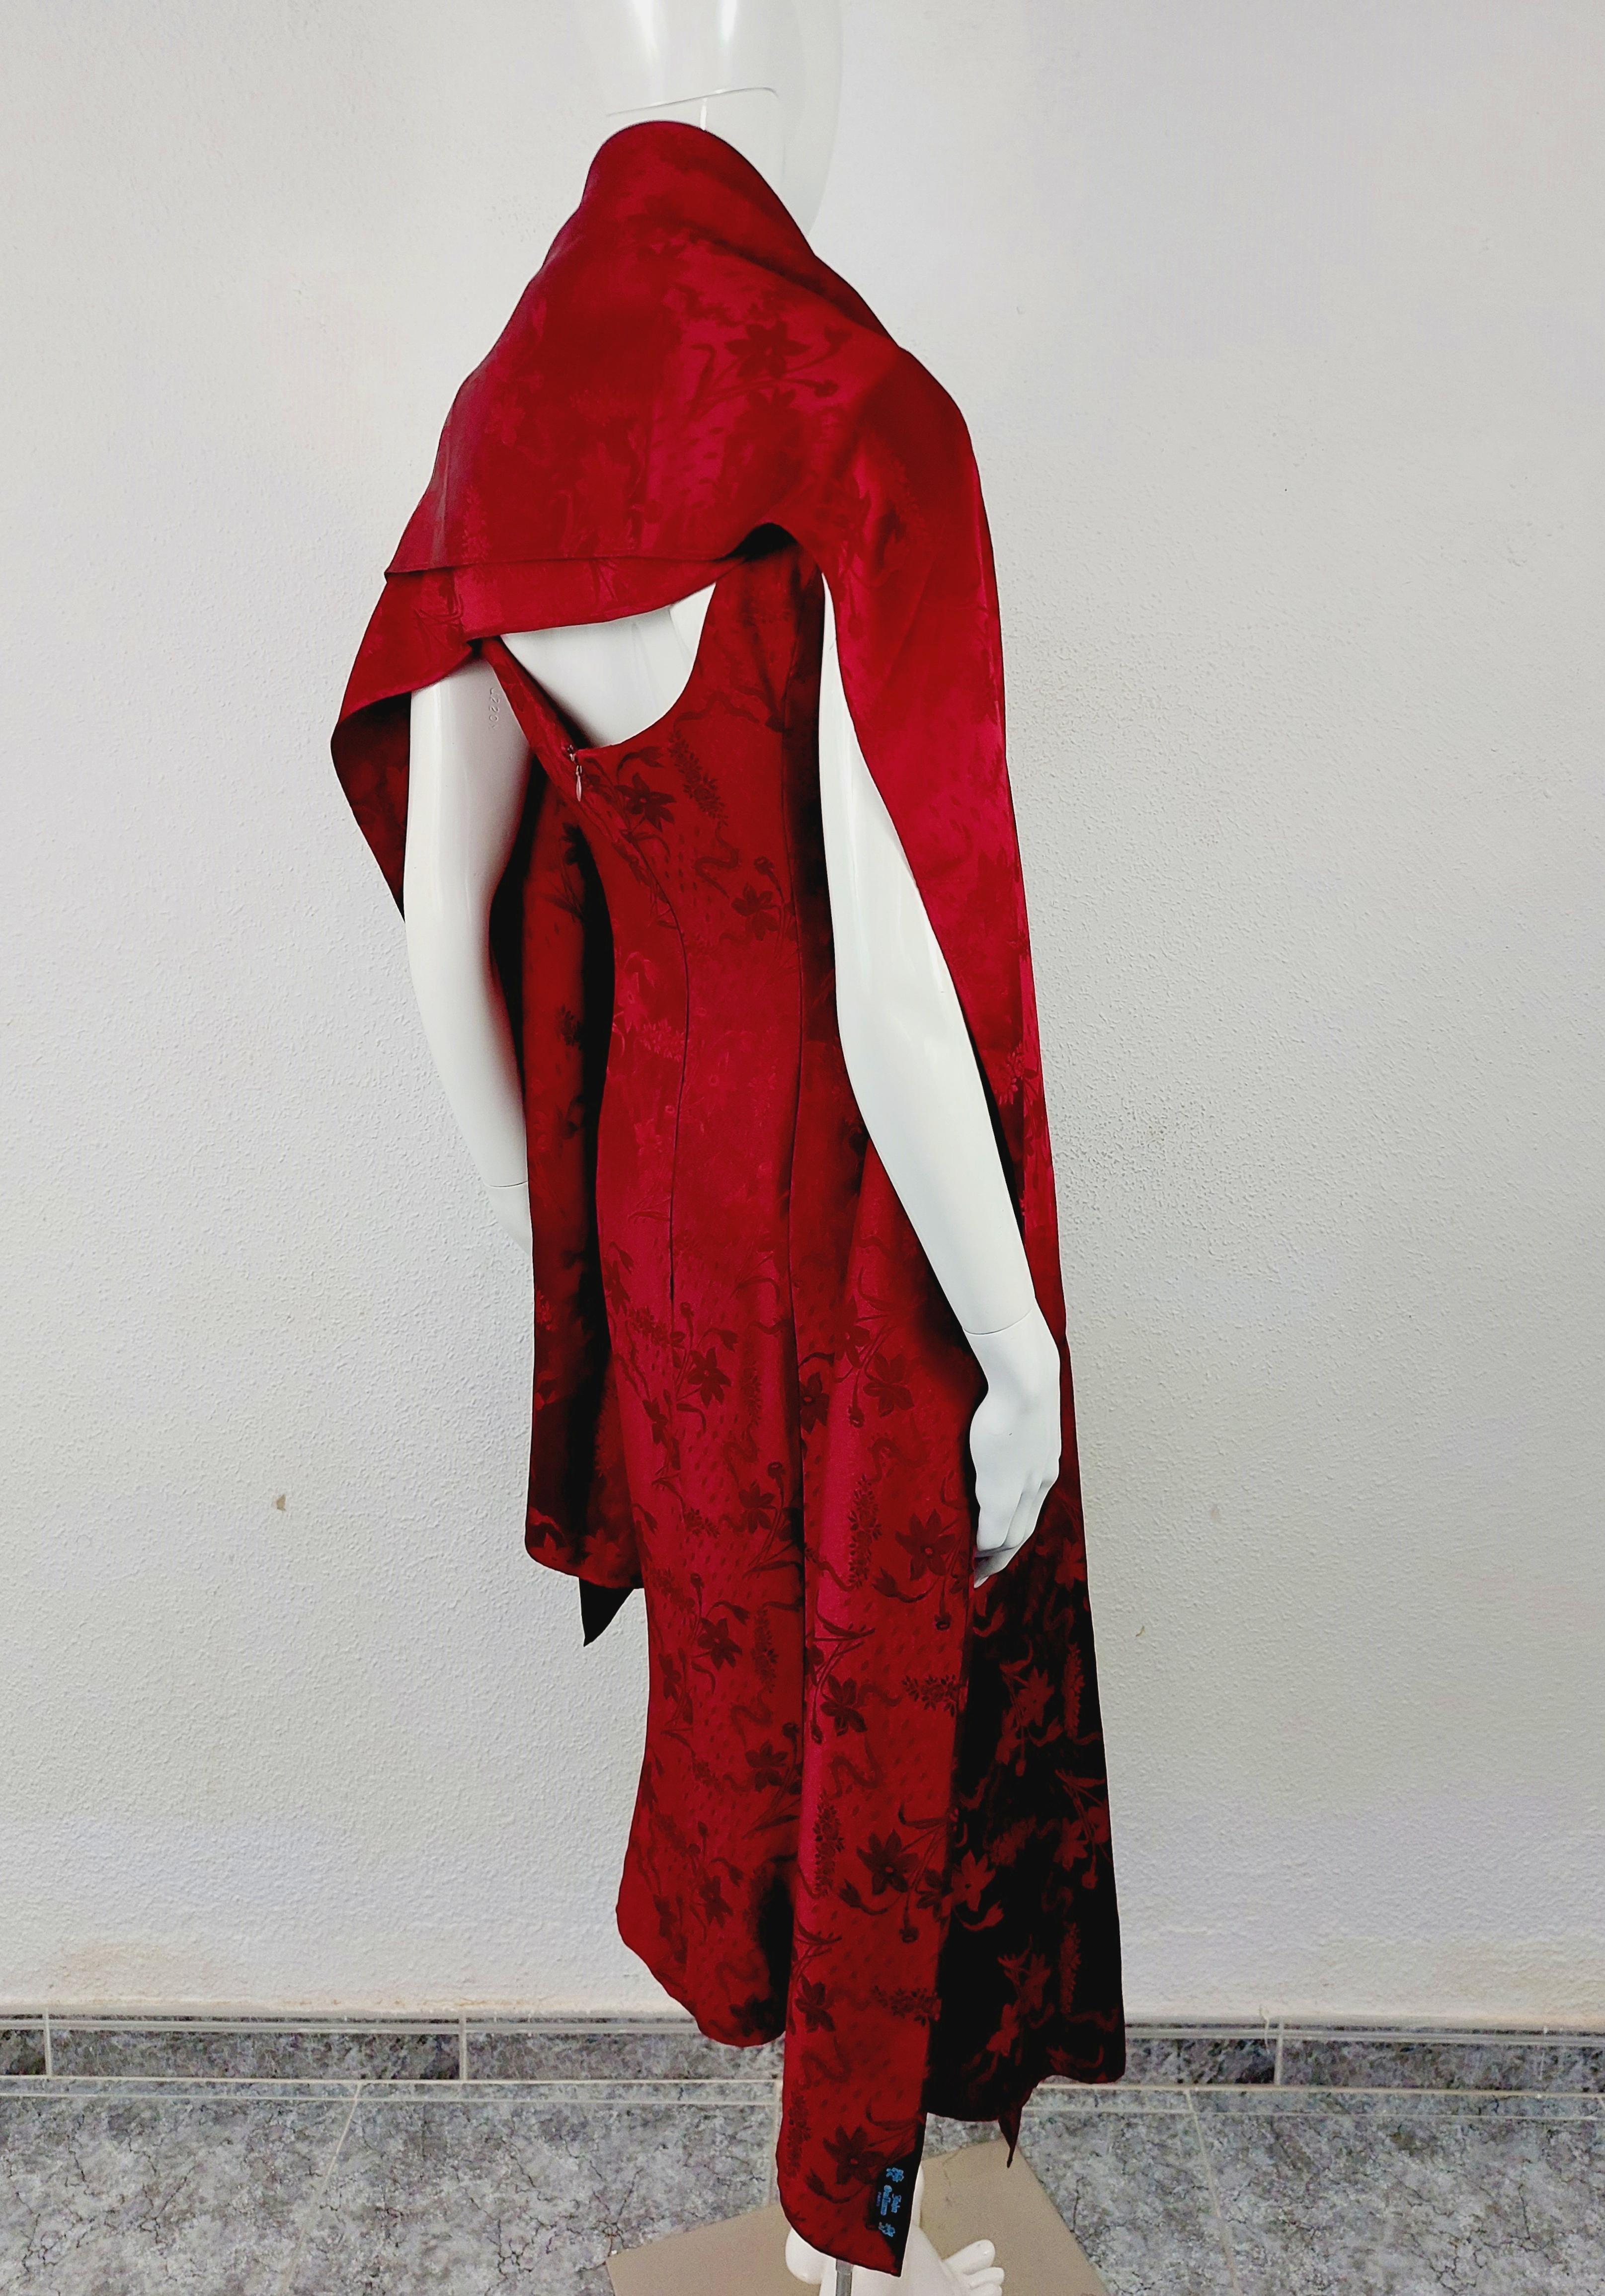 John Galliano London Red Silk Brocade Floral Runway Evening Gown Bias Dress with Scarf Stola, SS 1998

John Galliano red  silk brocade evening dress/ gown with attached fringed scarf and low back Spring-Summer 1998.
Collector piece.
Excellent